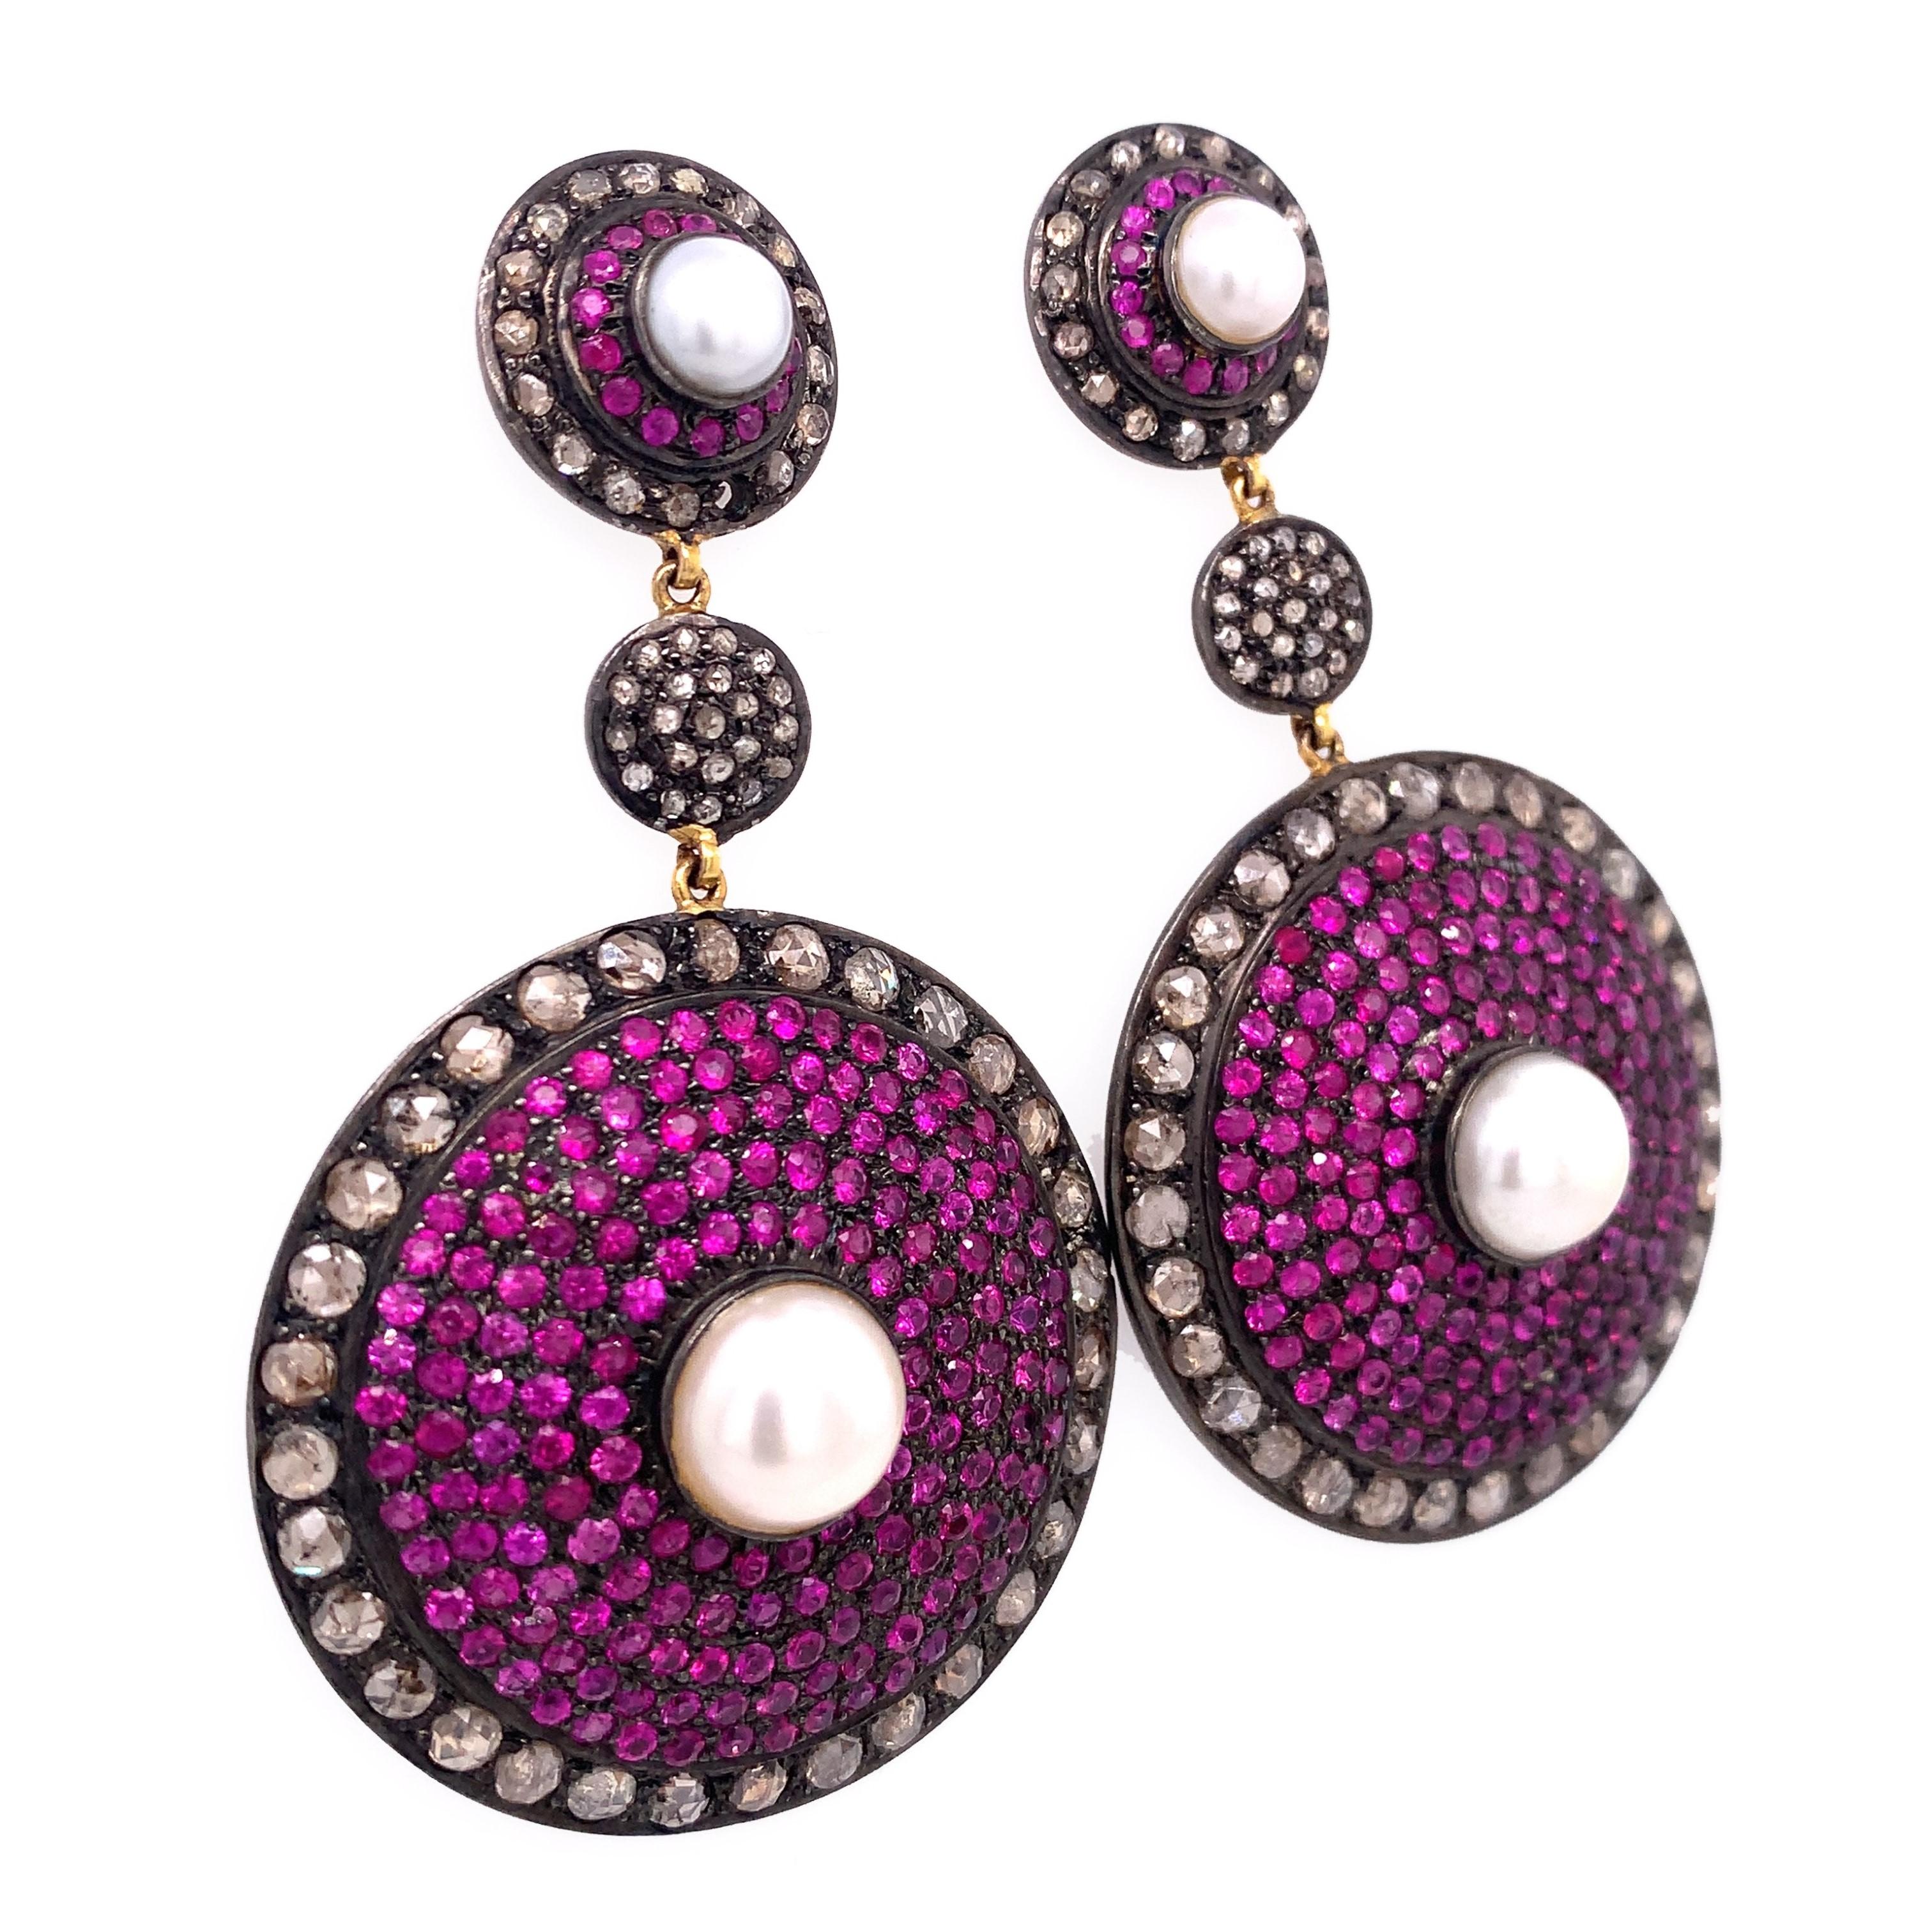 Life in Color Collection

Pearls, Rubies with icy Diamonds drop earring set in blackened Sterling Silver and 14 k yellow Gold plated. Approximately 6 mm and 9 mm Pearls.

Ruby: 7.07ct total weight.